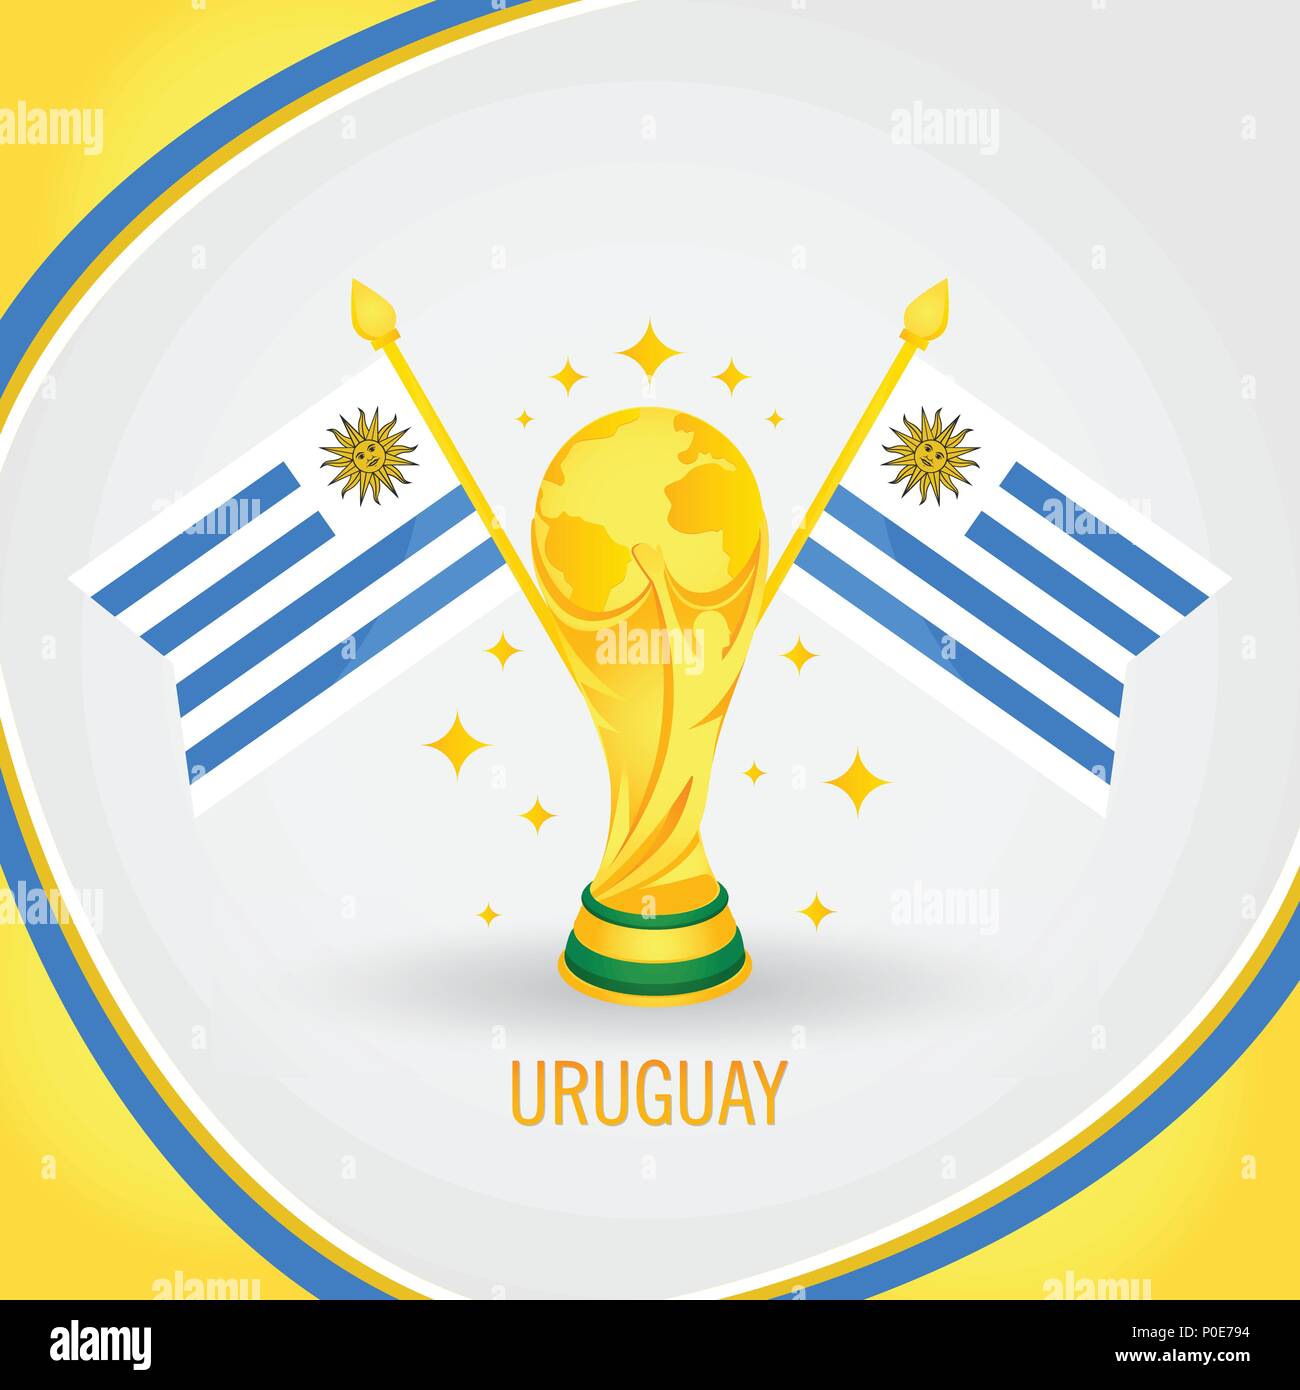 Uruguay Football Champion World Cup 2018 - Flag and Golden Trophy Stock Vector